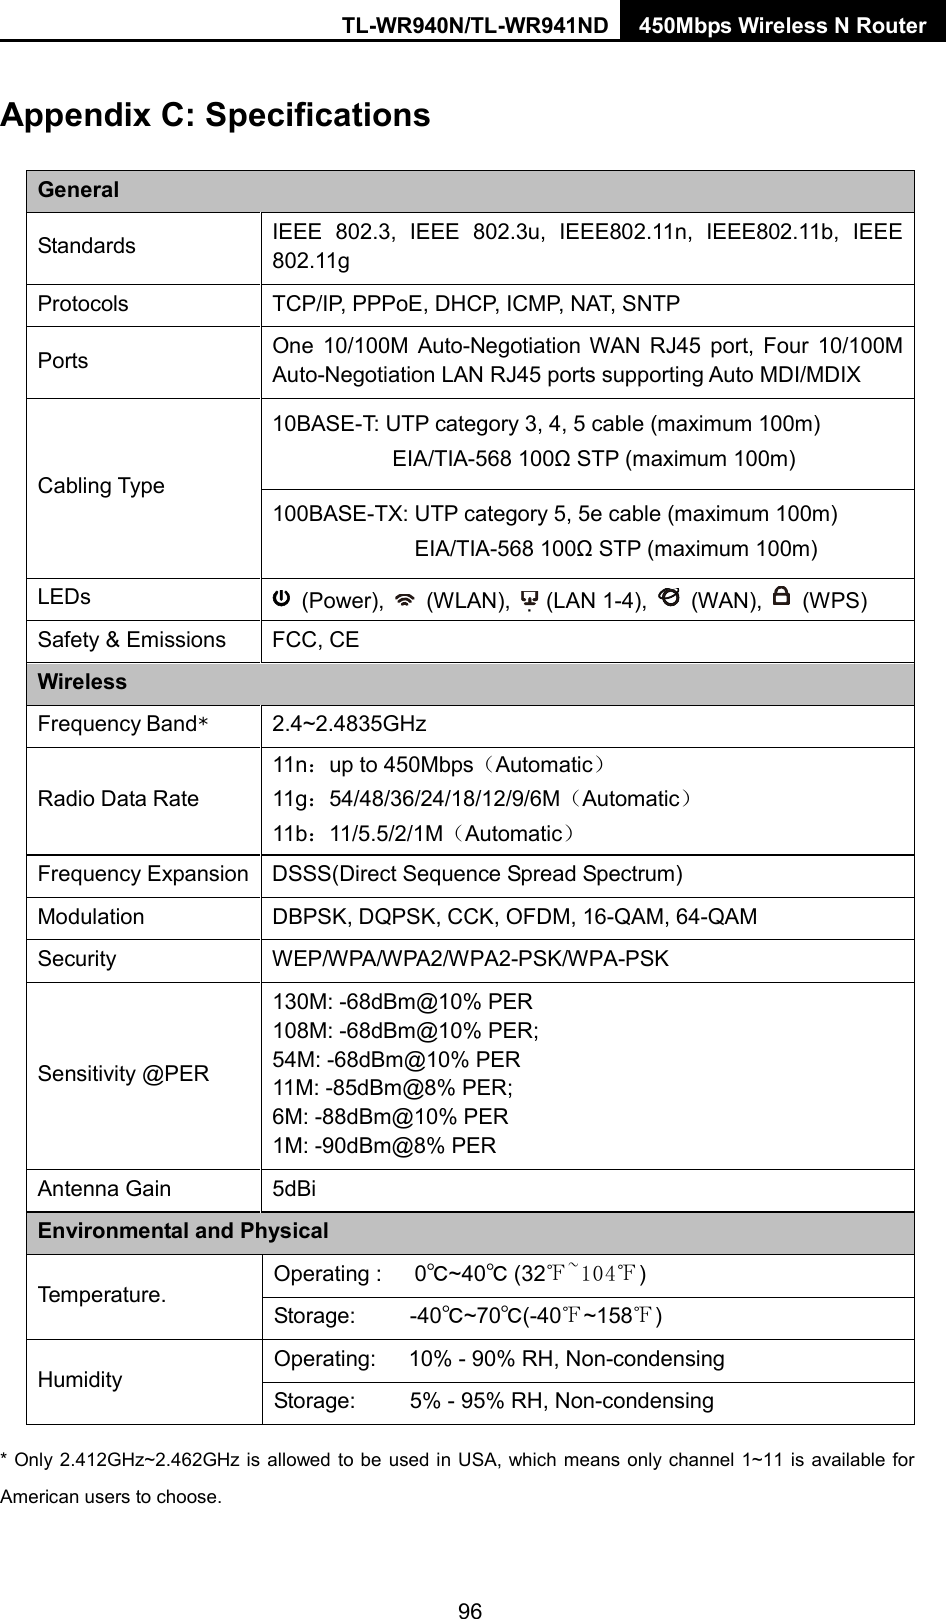 TL-WR940N/TL-WR941ND 450Mbps Wireless N Router  Appendix C: Specifications General Standards IEEE 802.3, IEEE  802.3u,  IEEE802.11n,  IEEE802.11b,  IEEE 802.11g Protocols TCP/IP, PPPoE, DHCP, ICMP, NAT, SNTP Ports One 10/100M Auto-Negotiation WAN RJ45 port, Four 10/100M Auto-Negotiation LAN RJ45 ports supporting Auto MDI/MDIX Cabling Type 10BASE-T: UTP category 3, 4, 5 cable (maximum 100m) EIA/TIA-568 100Ω STP (maximum 100m) 100BASE-TX: UTP category 5, 5e cable (maximum 100m) EIA/TIA-568 100Ω STP (maximum 100m) LEDs   (Power),   (WLAN),   (LAN 1-4),    (WAN),    (WPS) Safety &amp; Emissions FCC, CE Wireless Frequency Band* 2.4~2.4835GHz Radio Data Rate 11n：up to 450Mbps（Automatic） 11g：54/48/36/24/18/12/9/6M（Automatic） 11b：11/5.5/2/1M（Automatic） Frequency Expansion DSSS(Direct Sequence Spread Spectrum) Modulation DBPSK, DQPSK, CCK, OFDM, 16-QAM, 64-QAM Security WEP/WPA/WPA2/WPA2-PSK/WPA-PSK Sensitivity @PER 130M: -68dBm@10% PER 108M: -68dBm@10% PER;   54M: -68dBm@10% PER 11M: -85dBm@8% PER;   6M: -88dBm@10% PER 1M: -90dBm@8% PER Antenna Gain  5dBi Environmental and Physical Te m perature. Operating :   0℃~40℃ (32℉~104℉) Storage:     -40℃~70℃(-40℉~158℉) Humidity Operating:   10% - 90% RH, Non-condensing Storage:     5% - 95% RH, Non-condensing * Only 2.412GHz~2.462GHz is allowed to be used in USA, which means only channel 1~11 is available for American users to choose. 96 